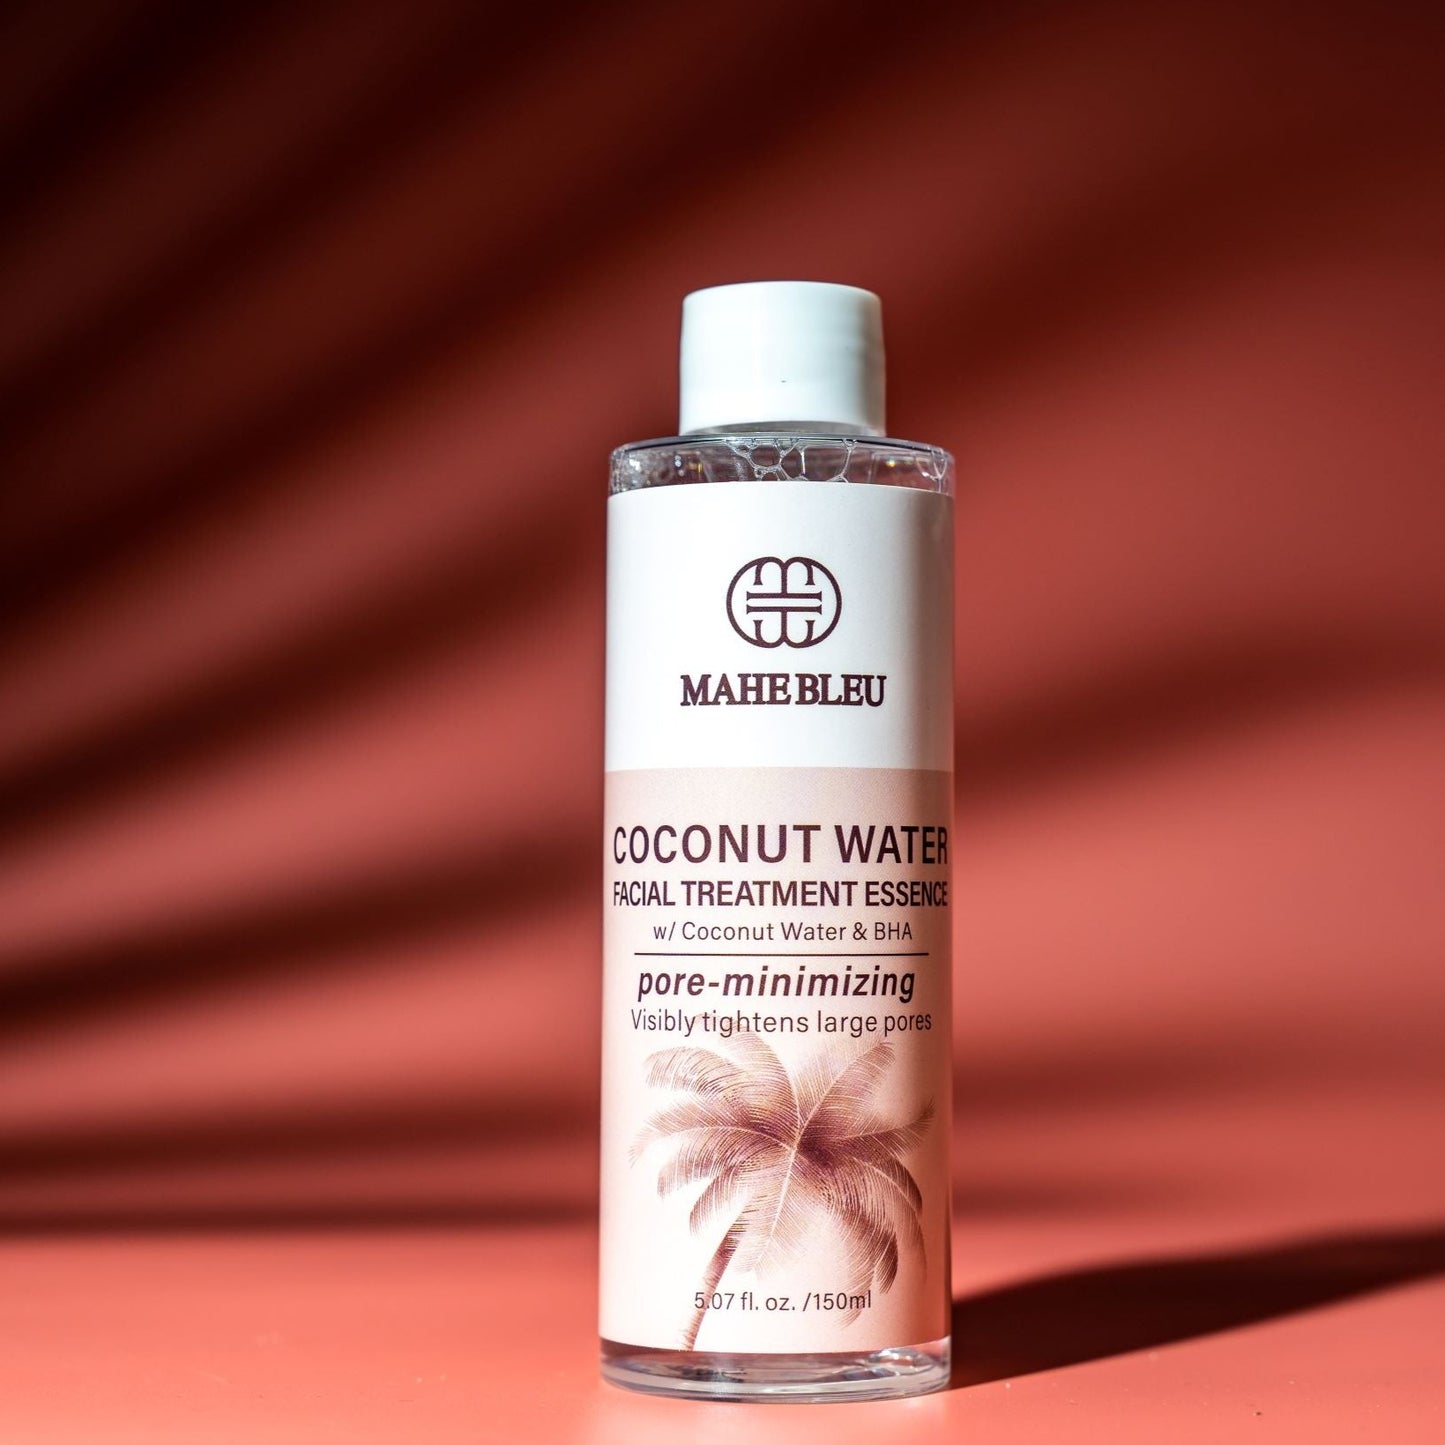 Coconut Water Facial Treatment Essence w/ Coconut Water & BHA